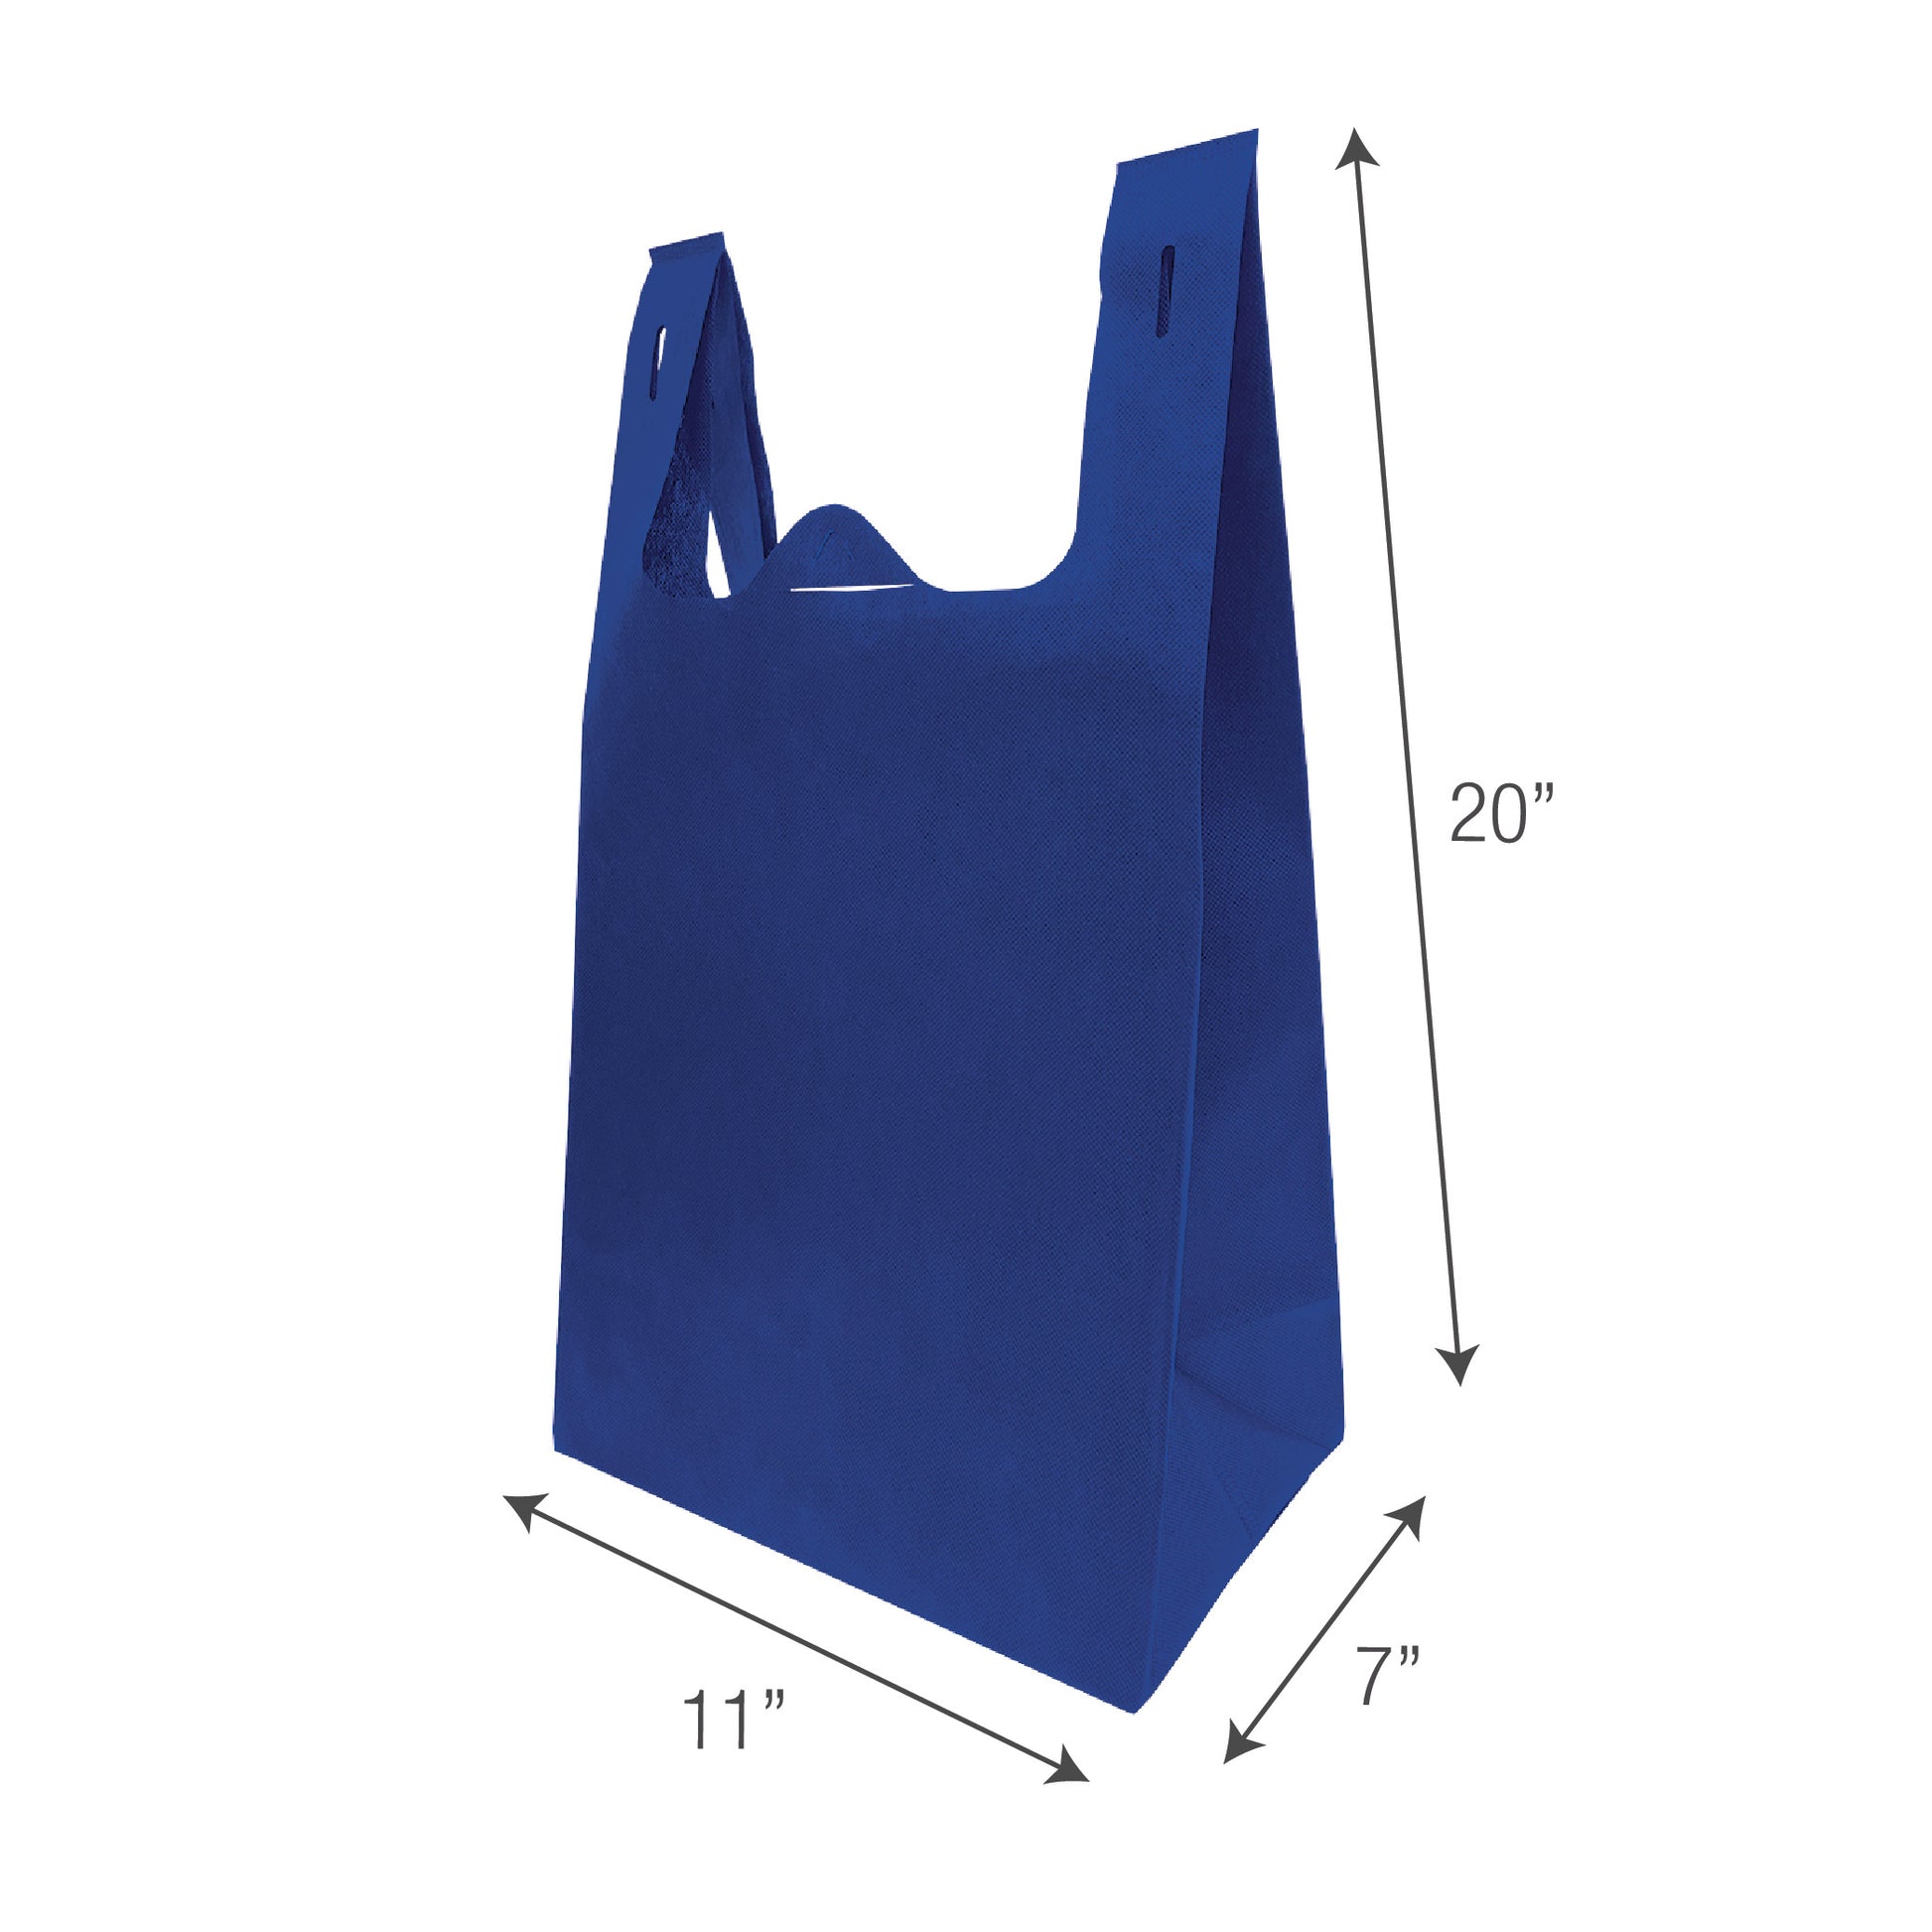 Blue reusable T-shirt non-woven shopping bag with handle measurements displayed.